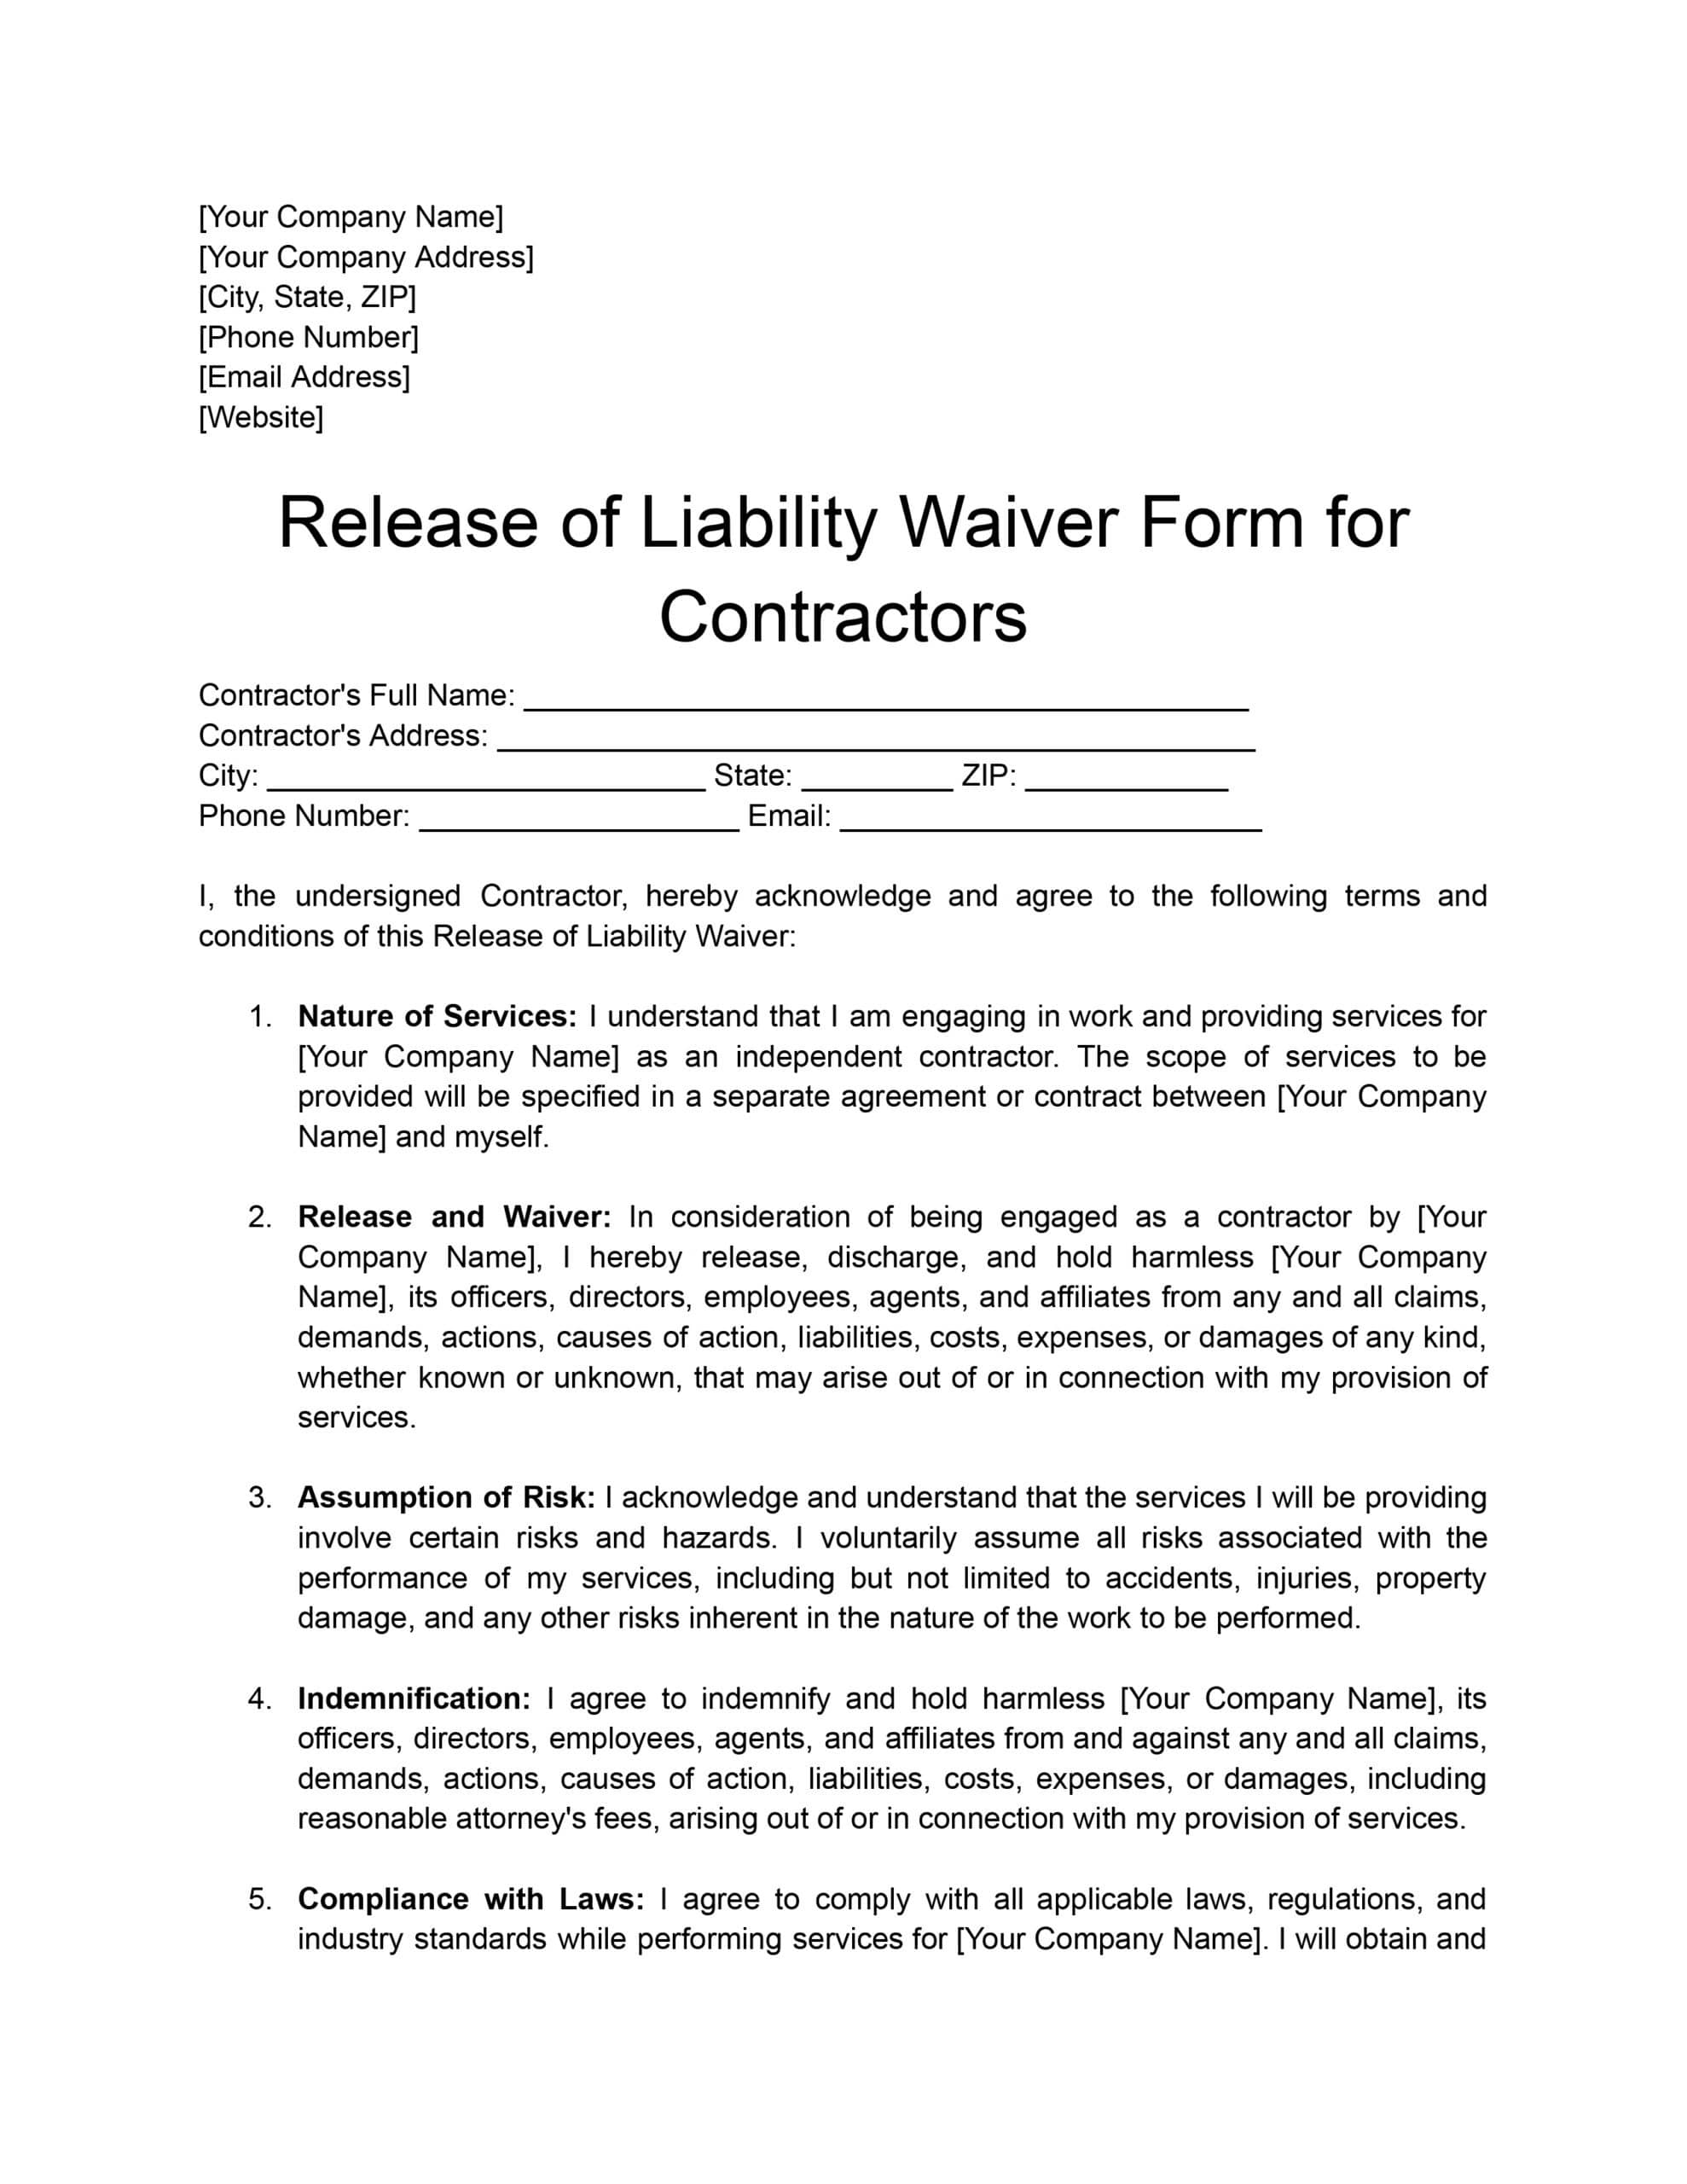 Release of Liability Waiver Form for Contractors